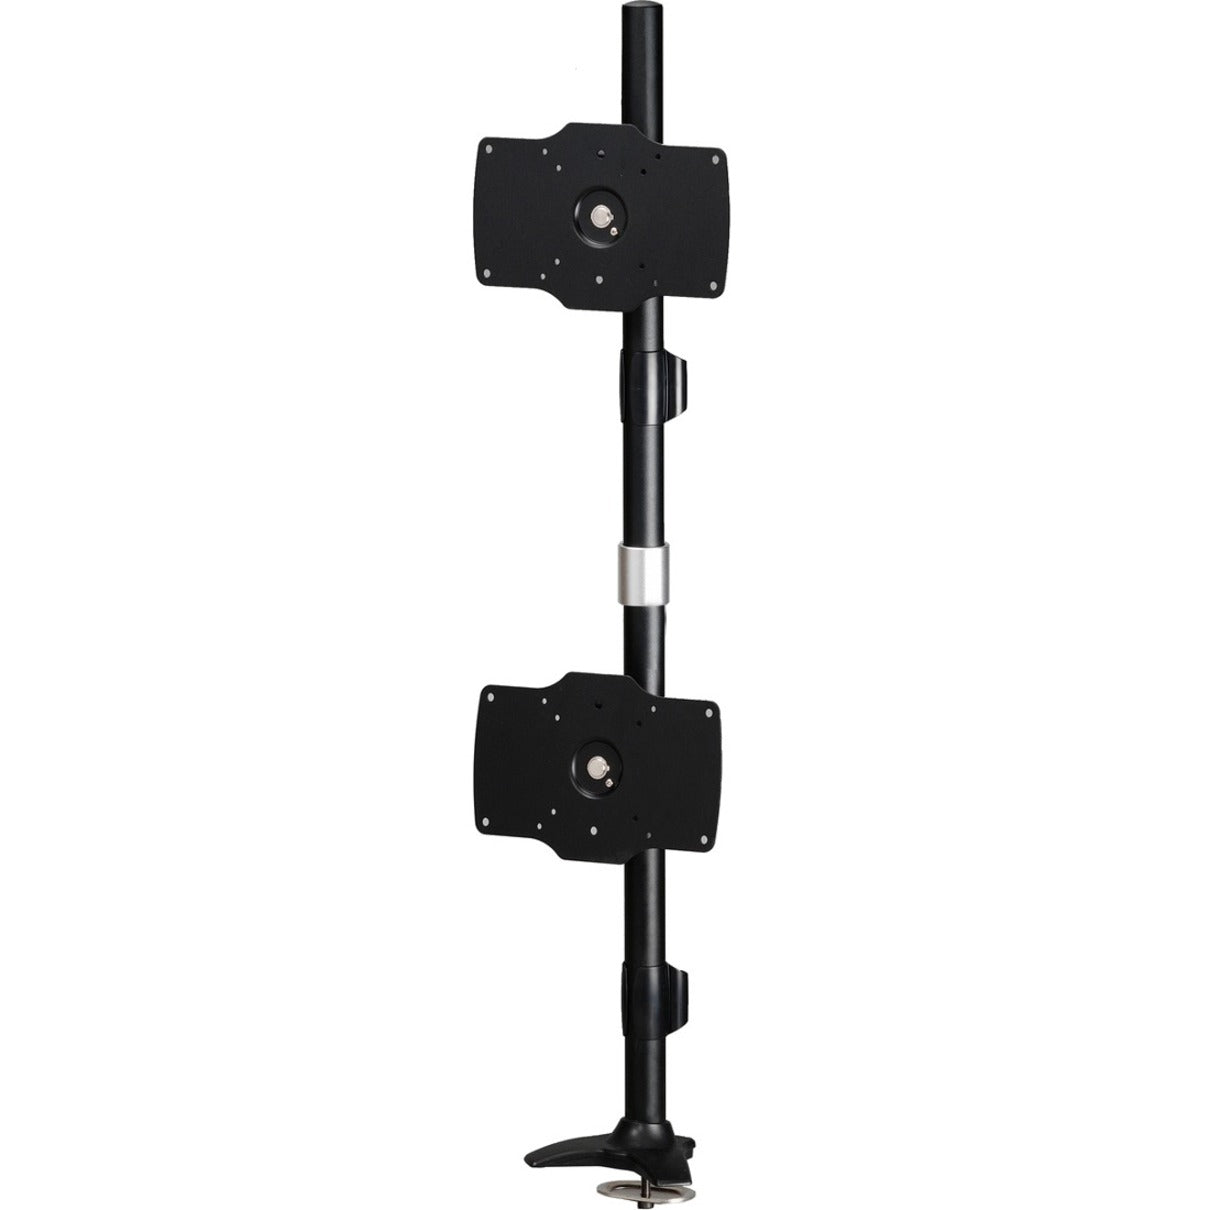 Amer Mounts AMR2P32V Dual Vertical Mount Grommet for Flat Panel Display, Supports 2 Screens, 32" Max